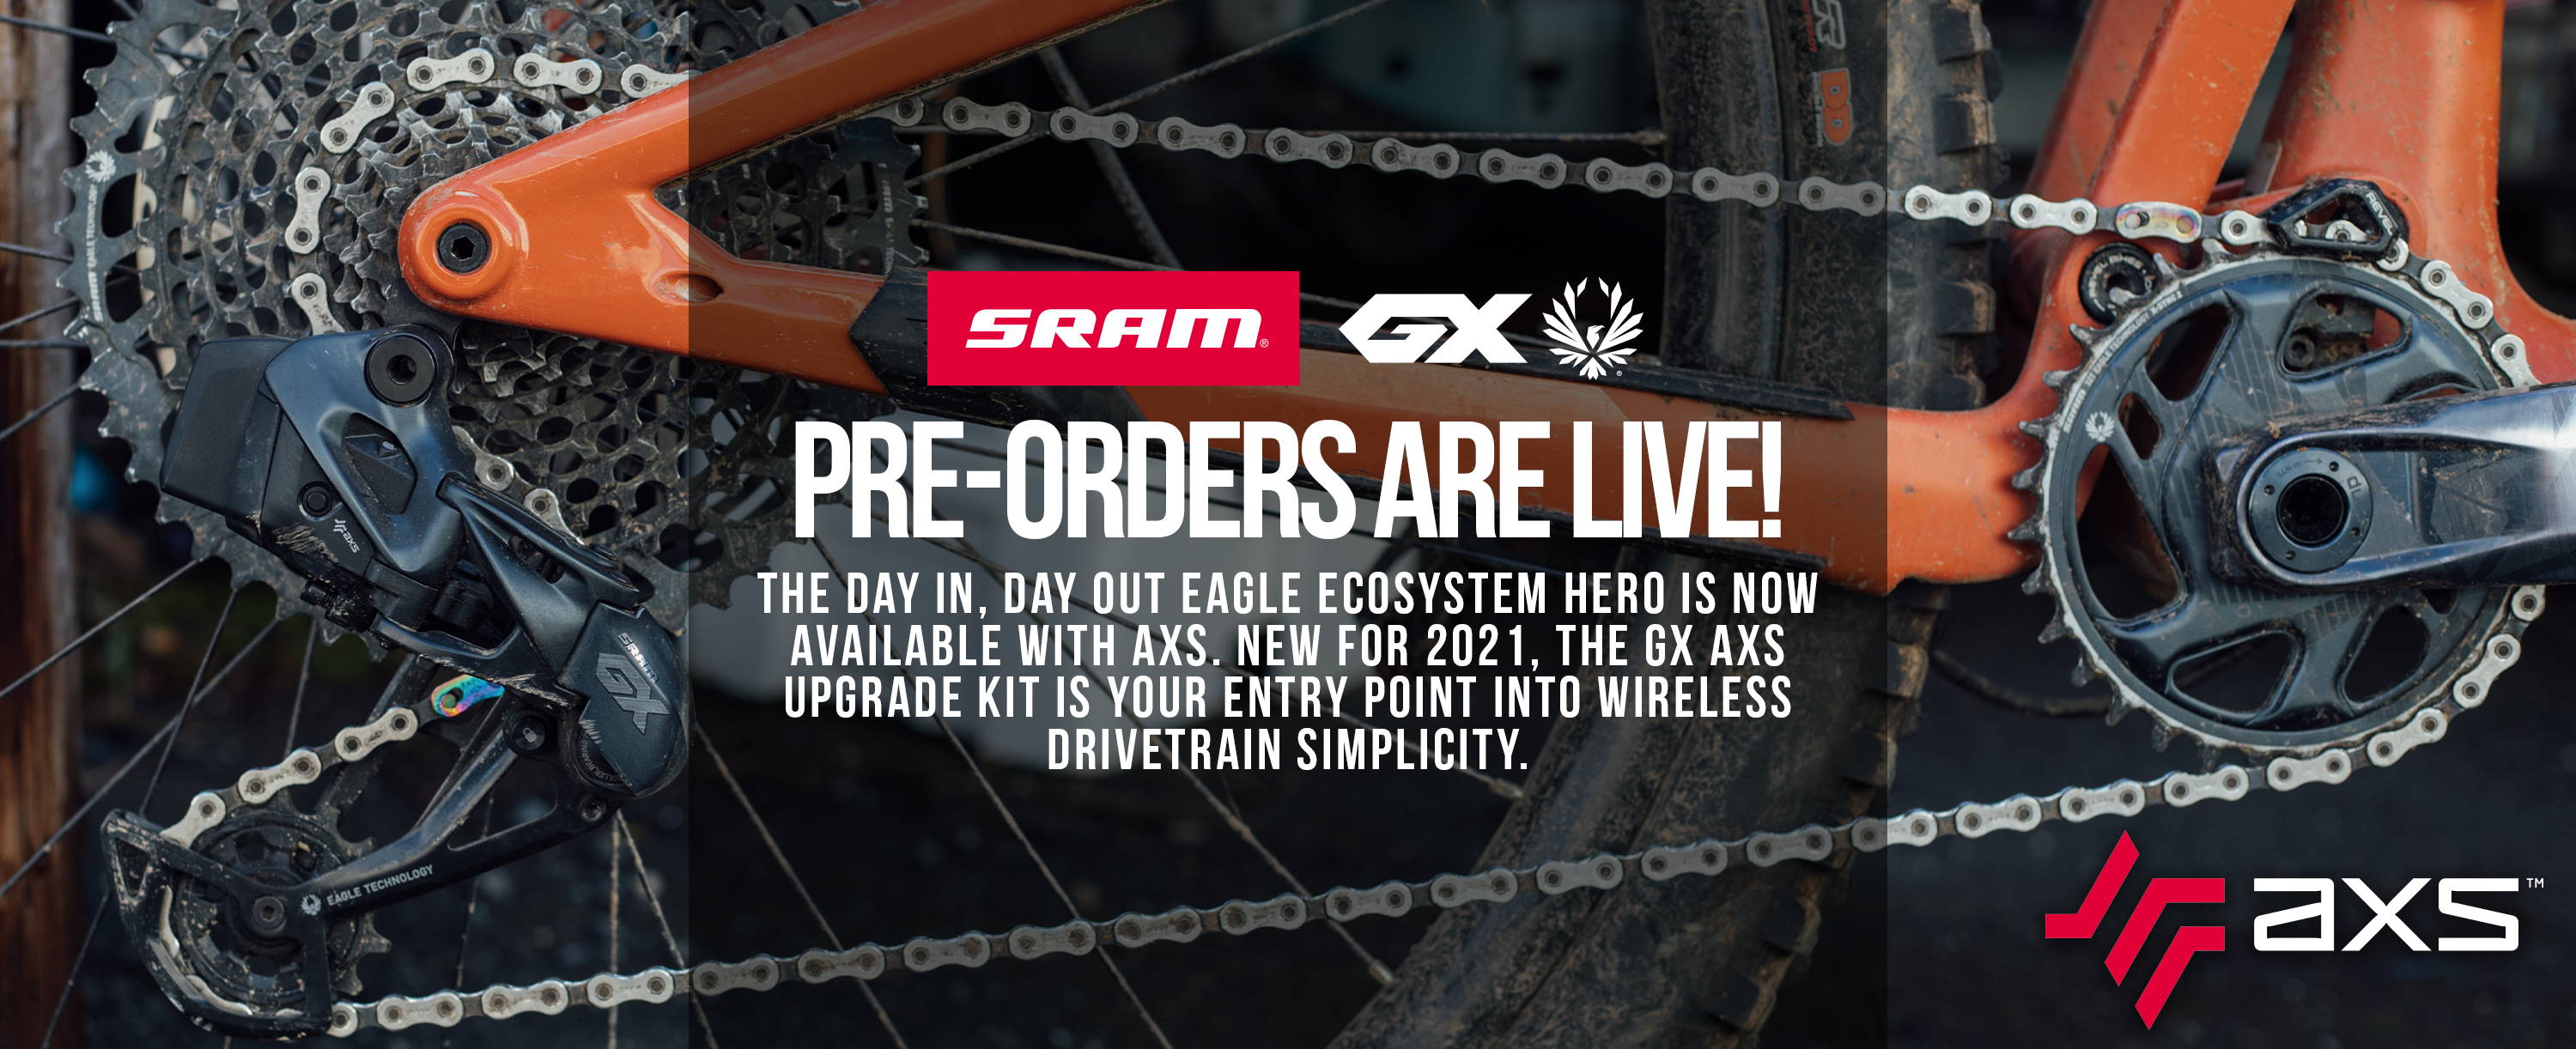 sram gx axs preorder banner with a gx eagle axs groupset on display